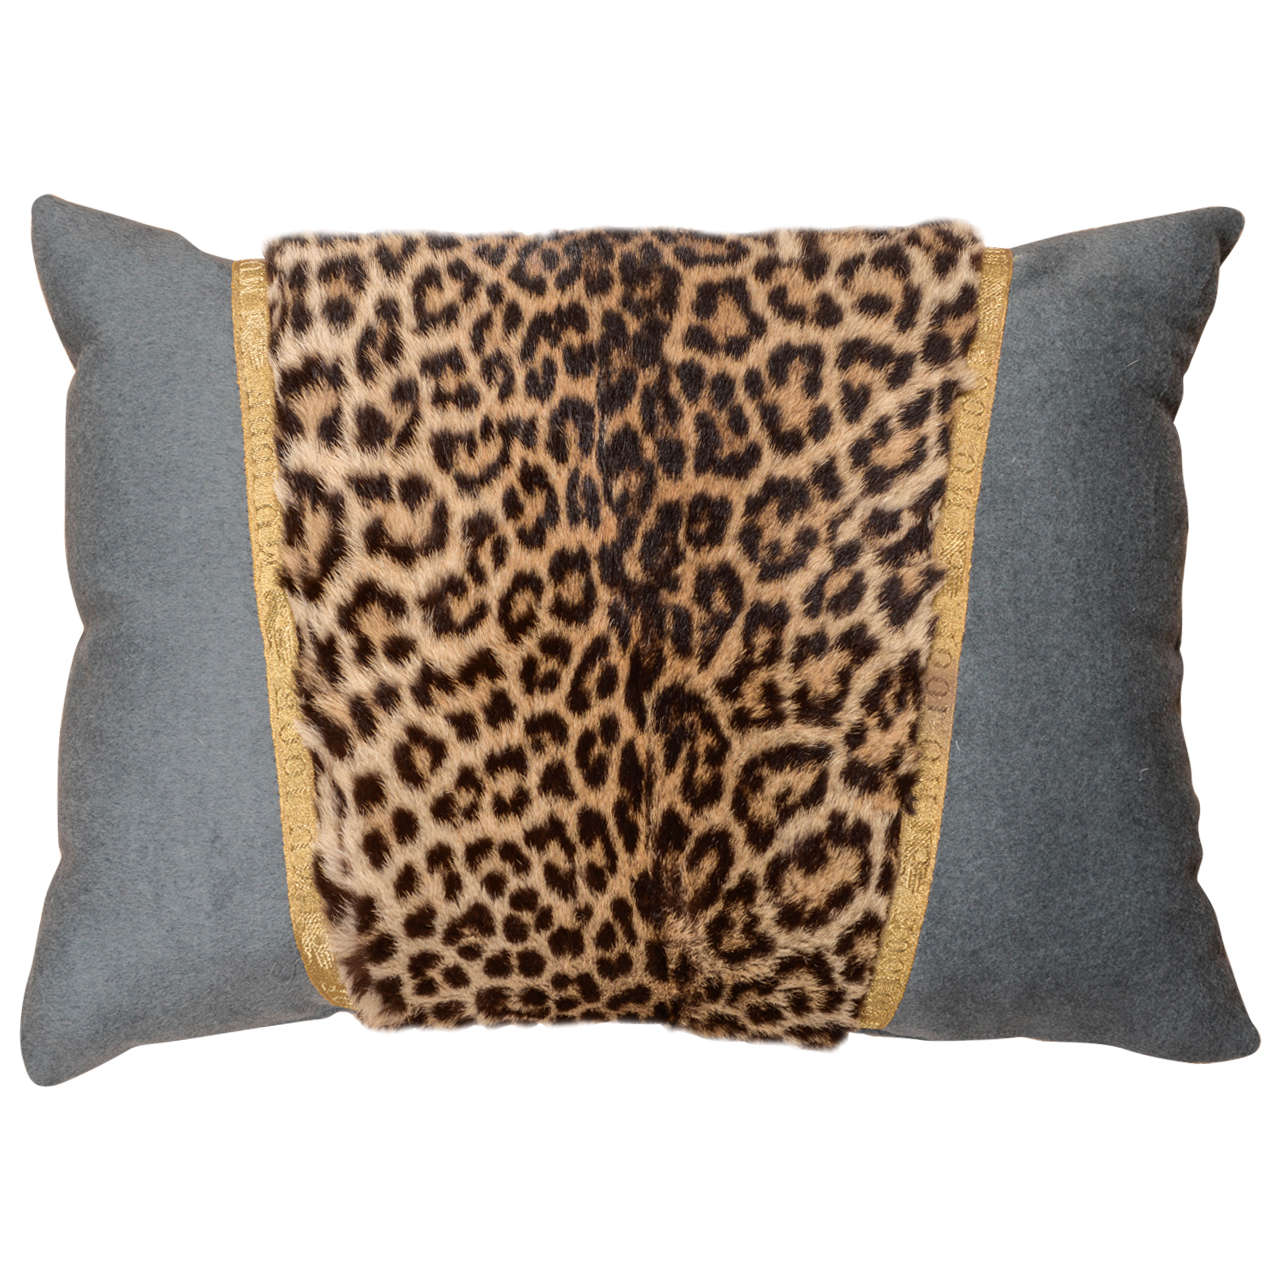 Early 20th-century Leopard skin pillow